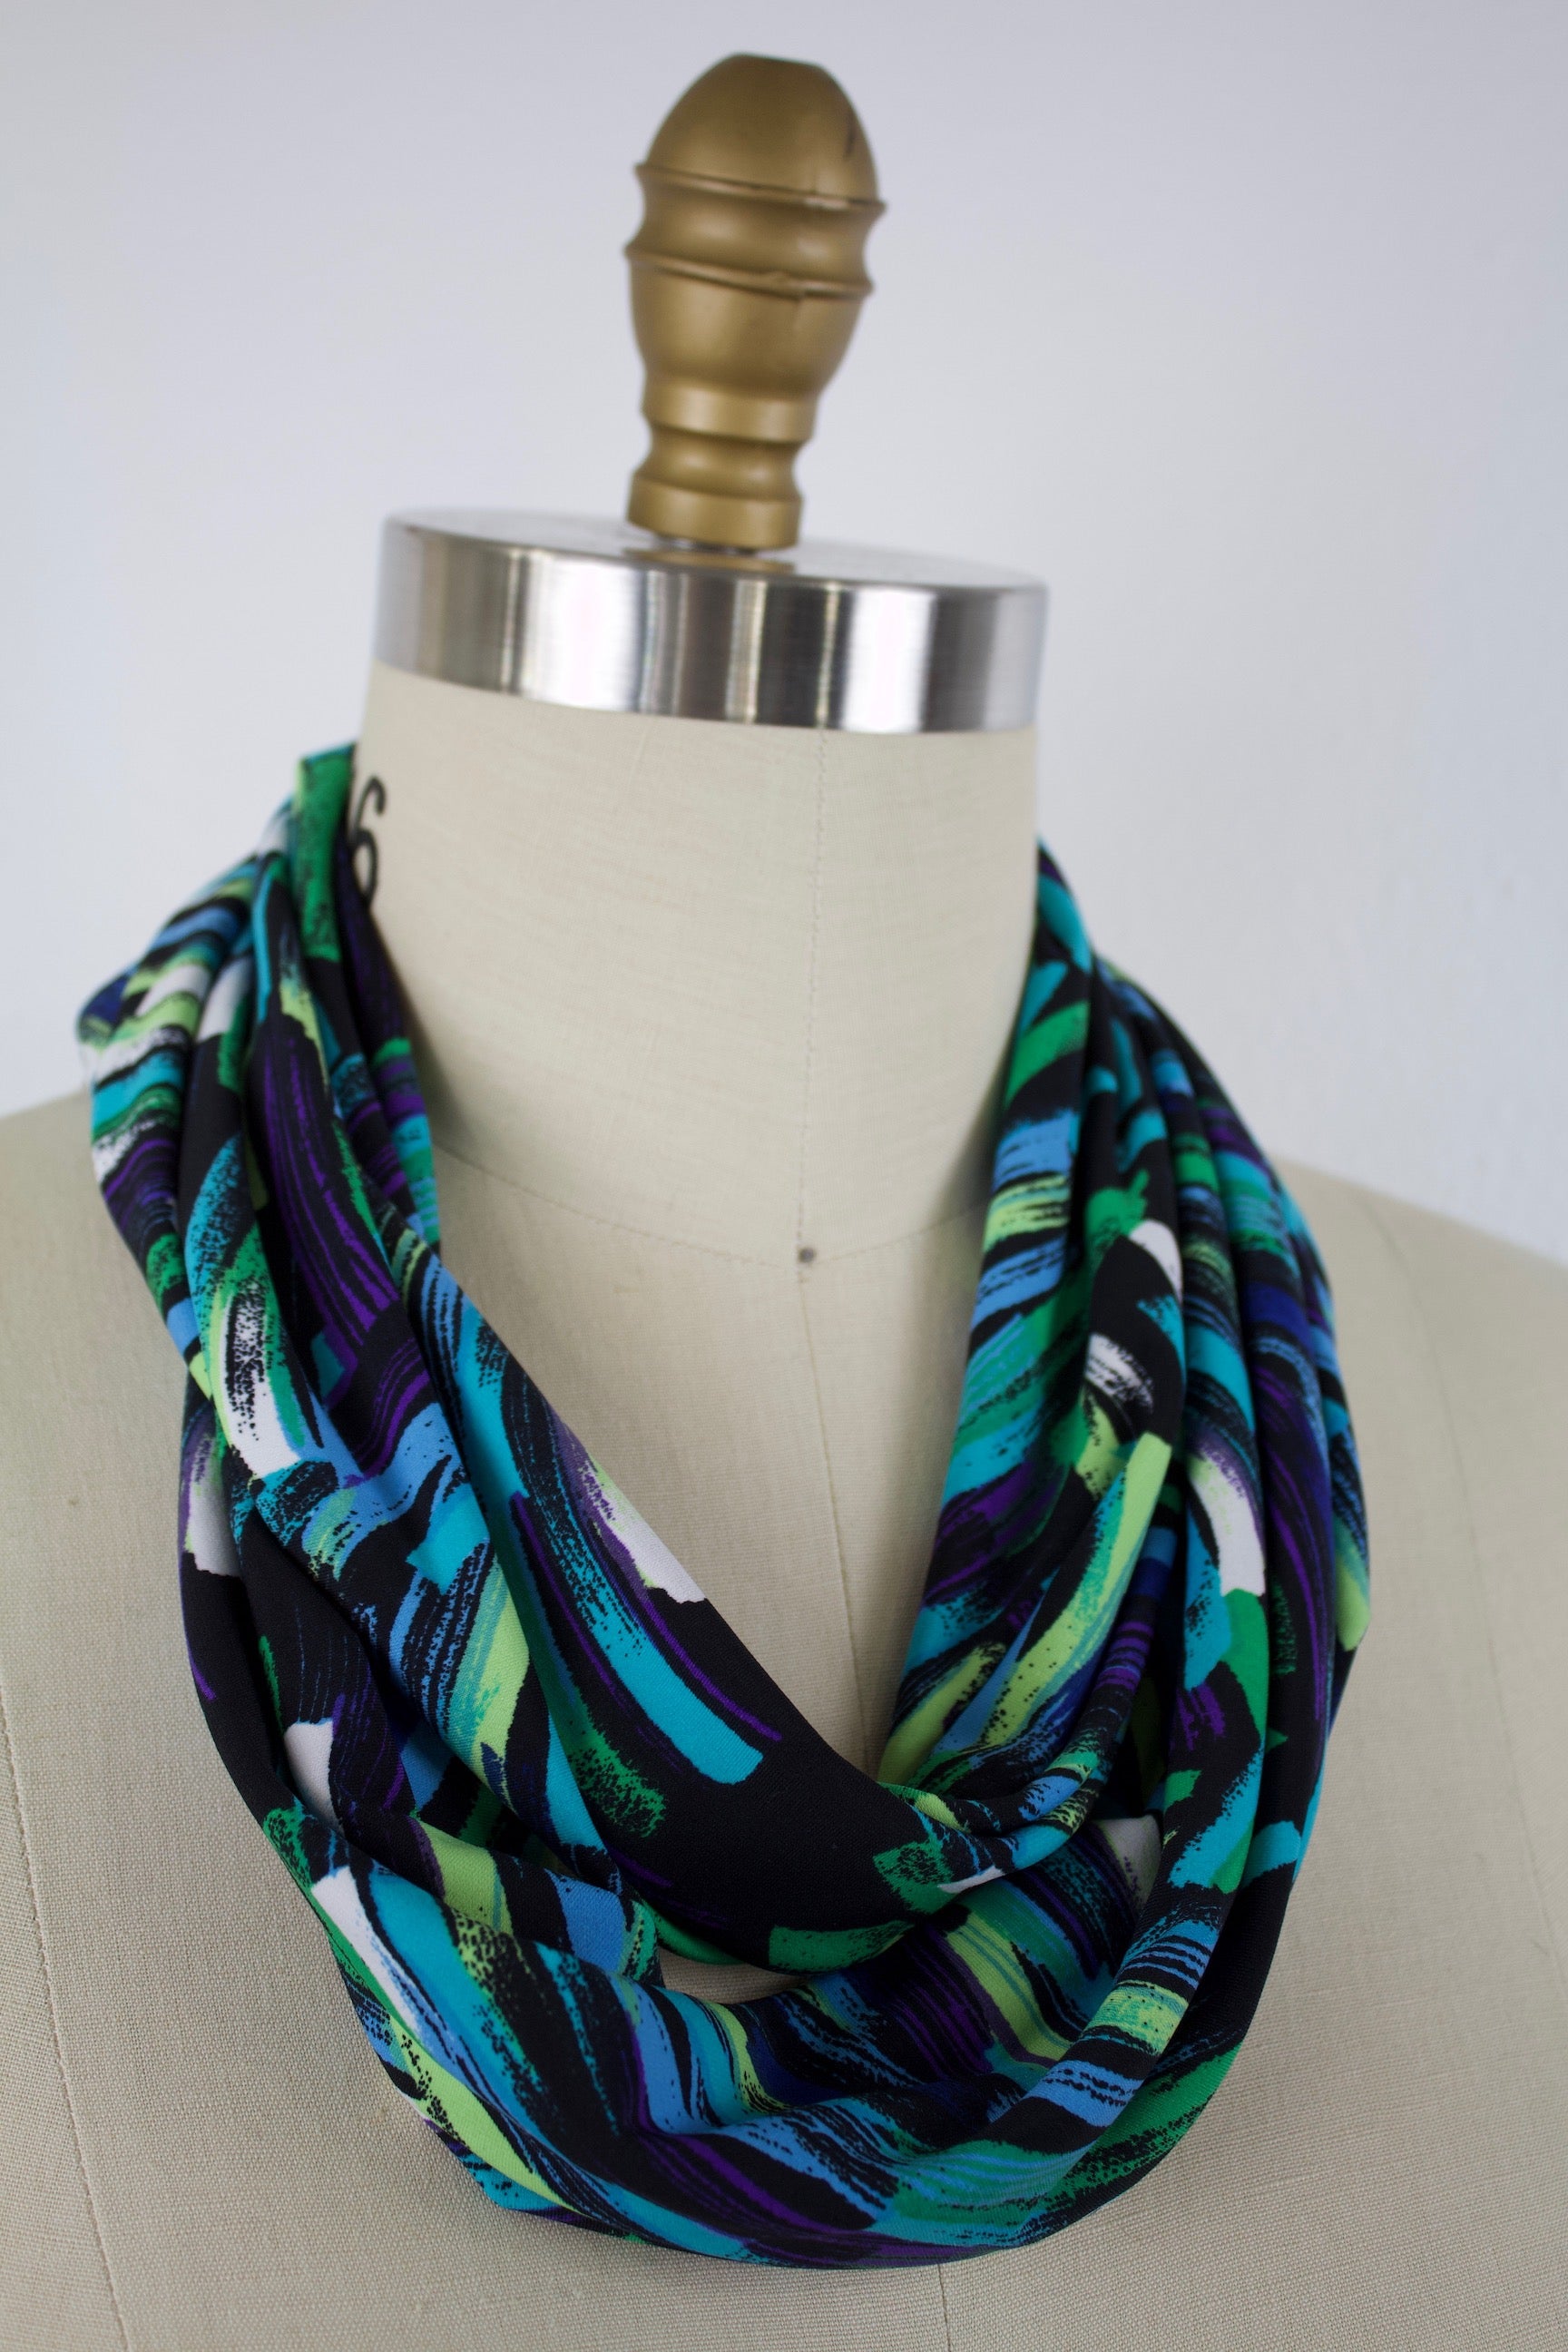 Jersey Infinity Scarf-The Blue Peony-Category_Infinity Scarf,Color_Black,Color_Blue,Color_Teal,Department_Personal Accessory,Material_Polyester,Pattern_Graphic